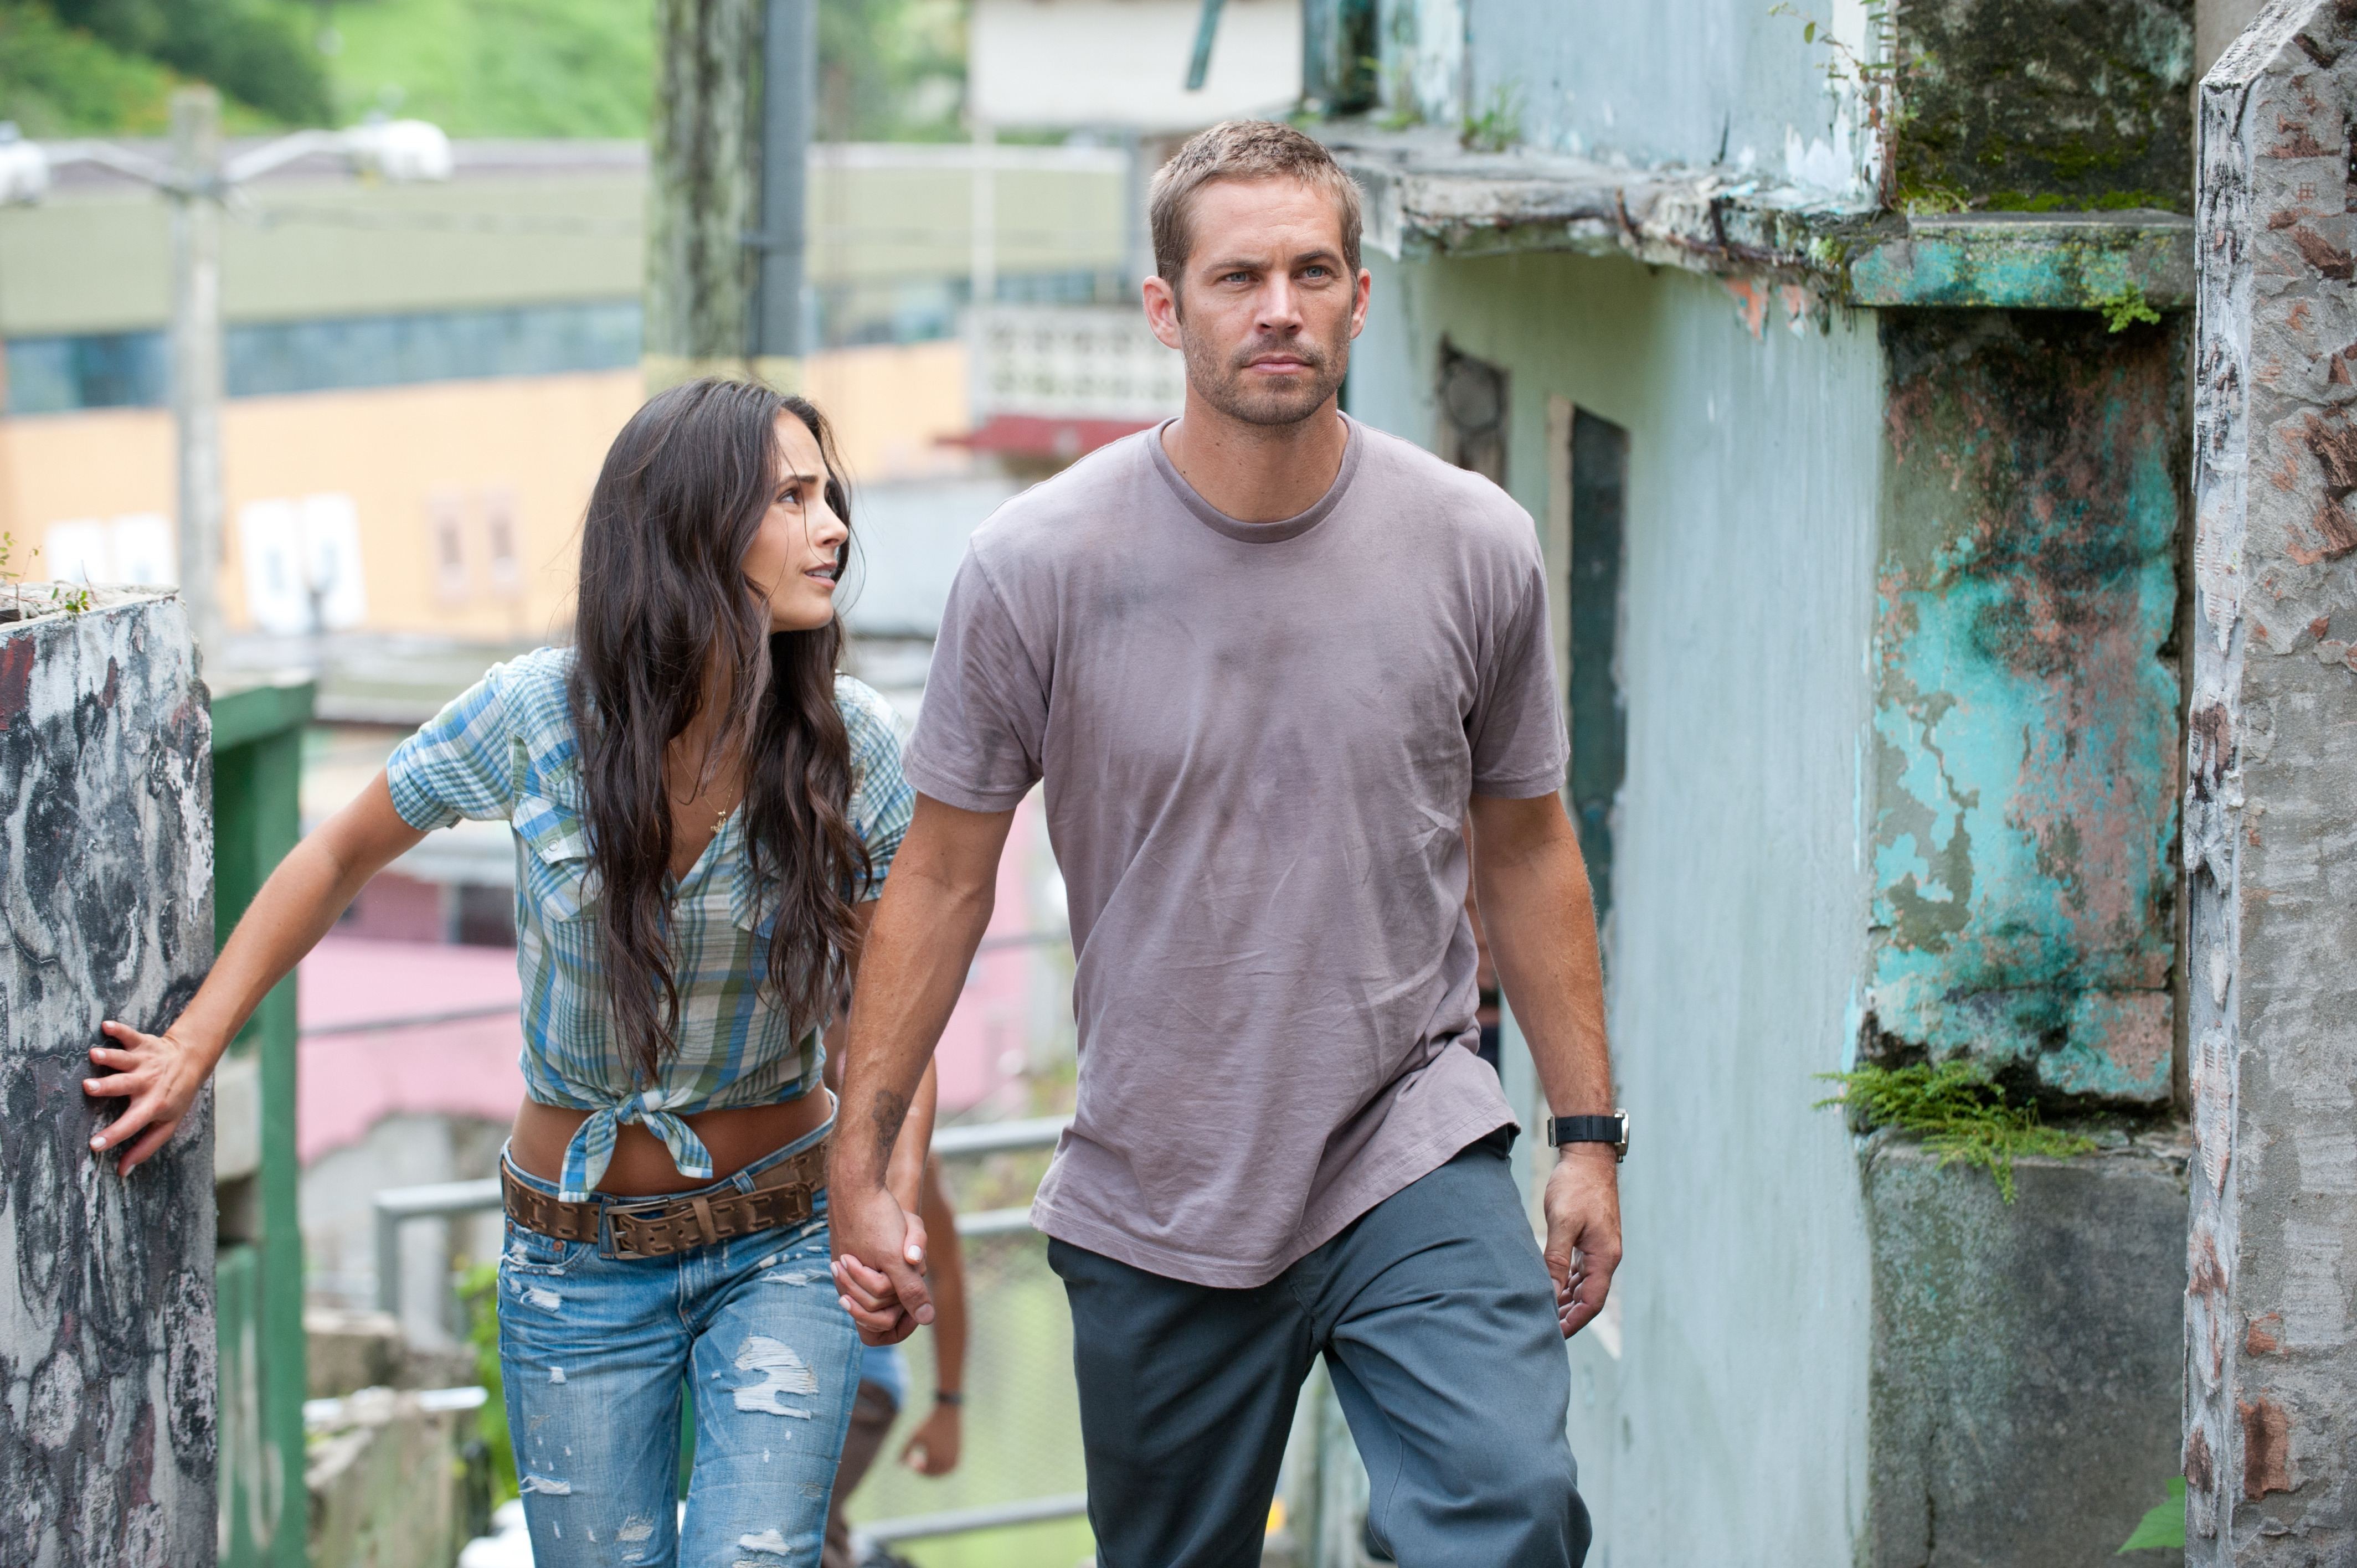 Paul Walker Fast And Furious Jordana Brewster Movies Couple Holding Hands 4256x2832